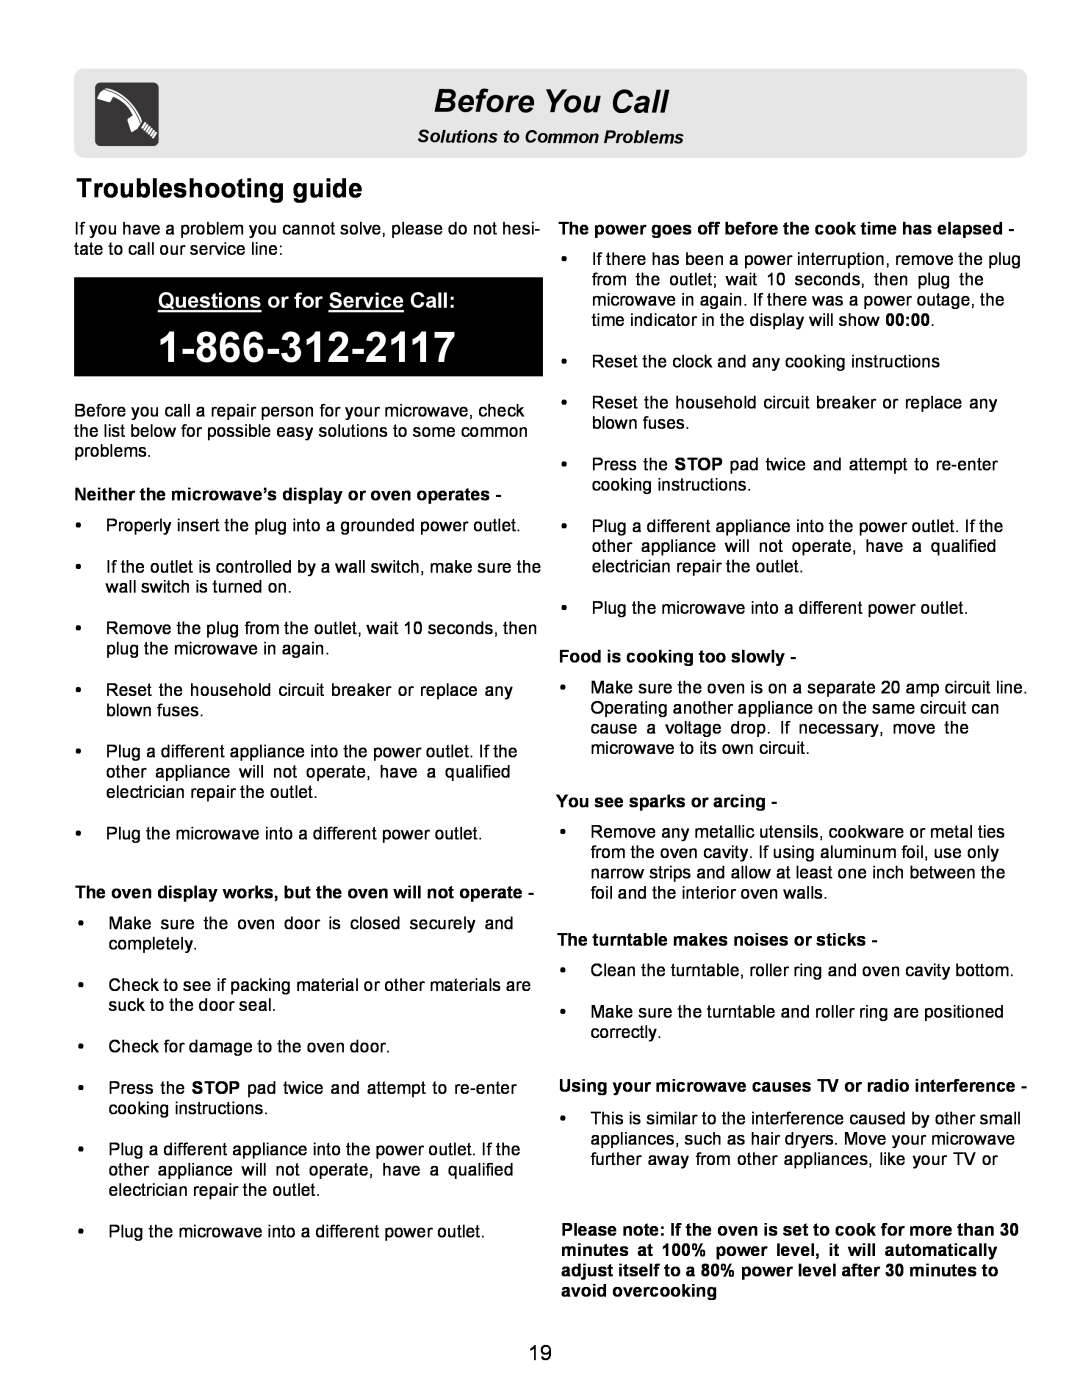 Frigidaire FFCE1439LB Troubleshooting guide, Neither the microwave’s display or oven operates, Food is cooking too slowly 